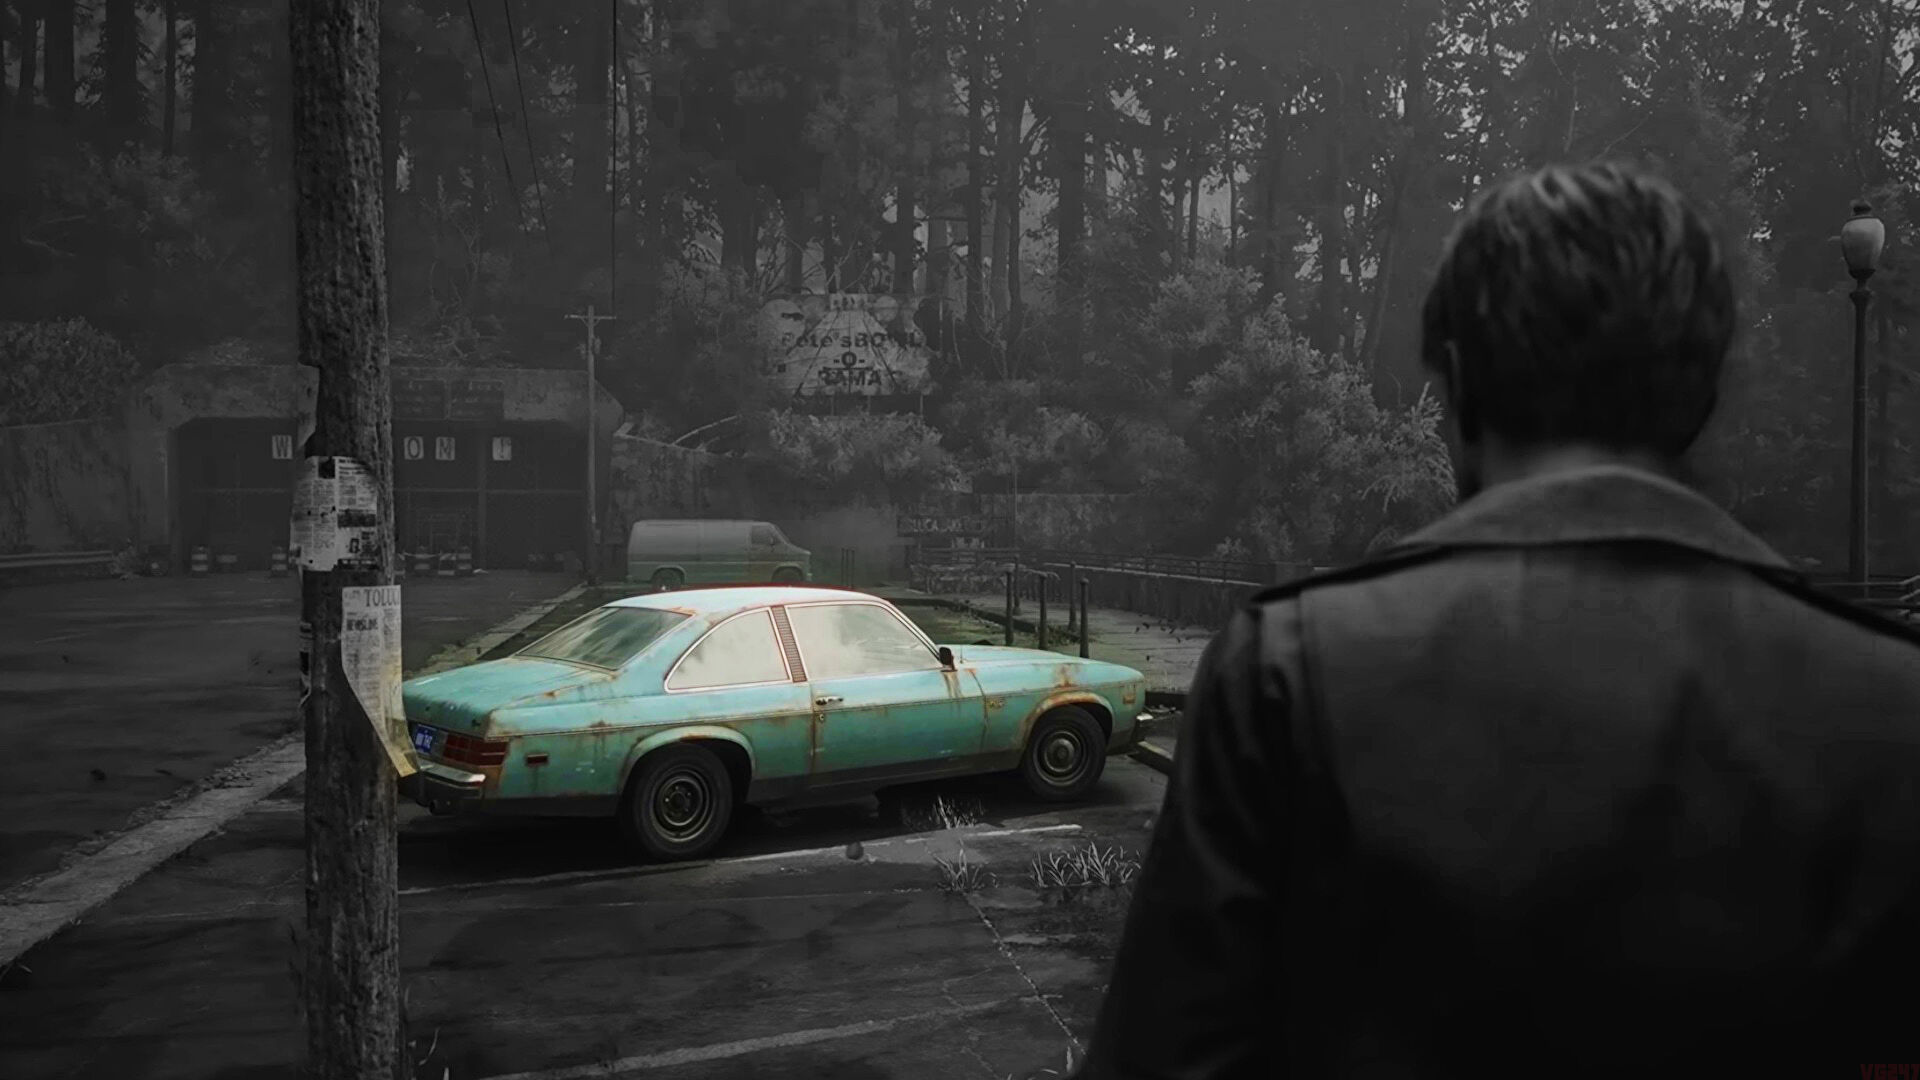 Whether it’s the original or the remake, I can’t unsee Silent Hill 2’s wonky parking